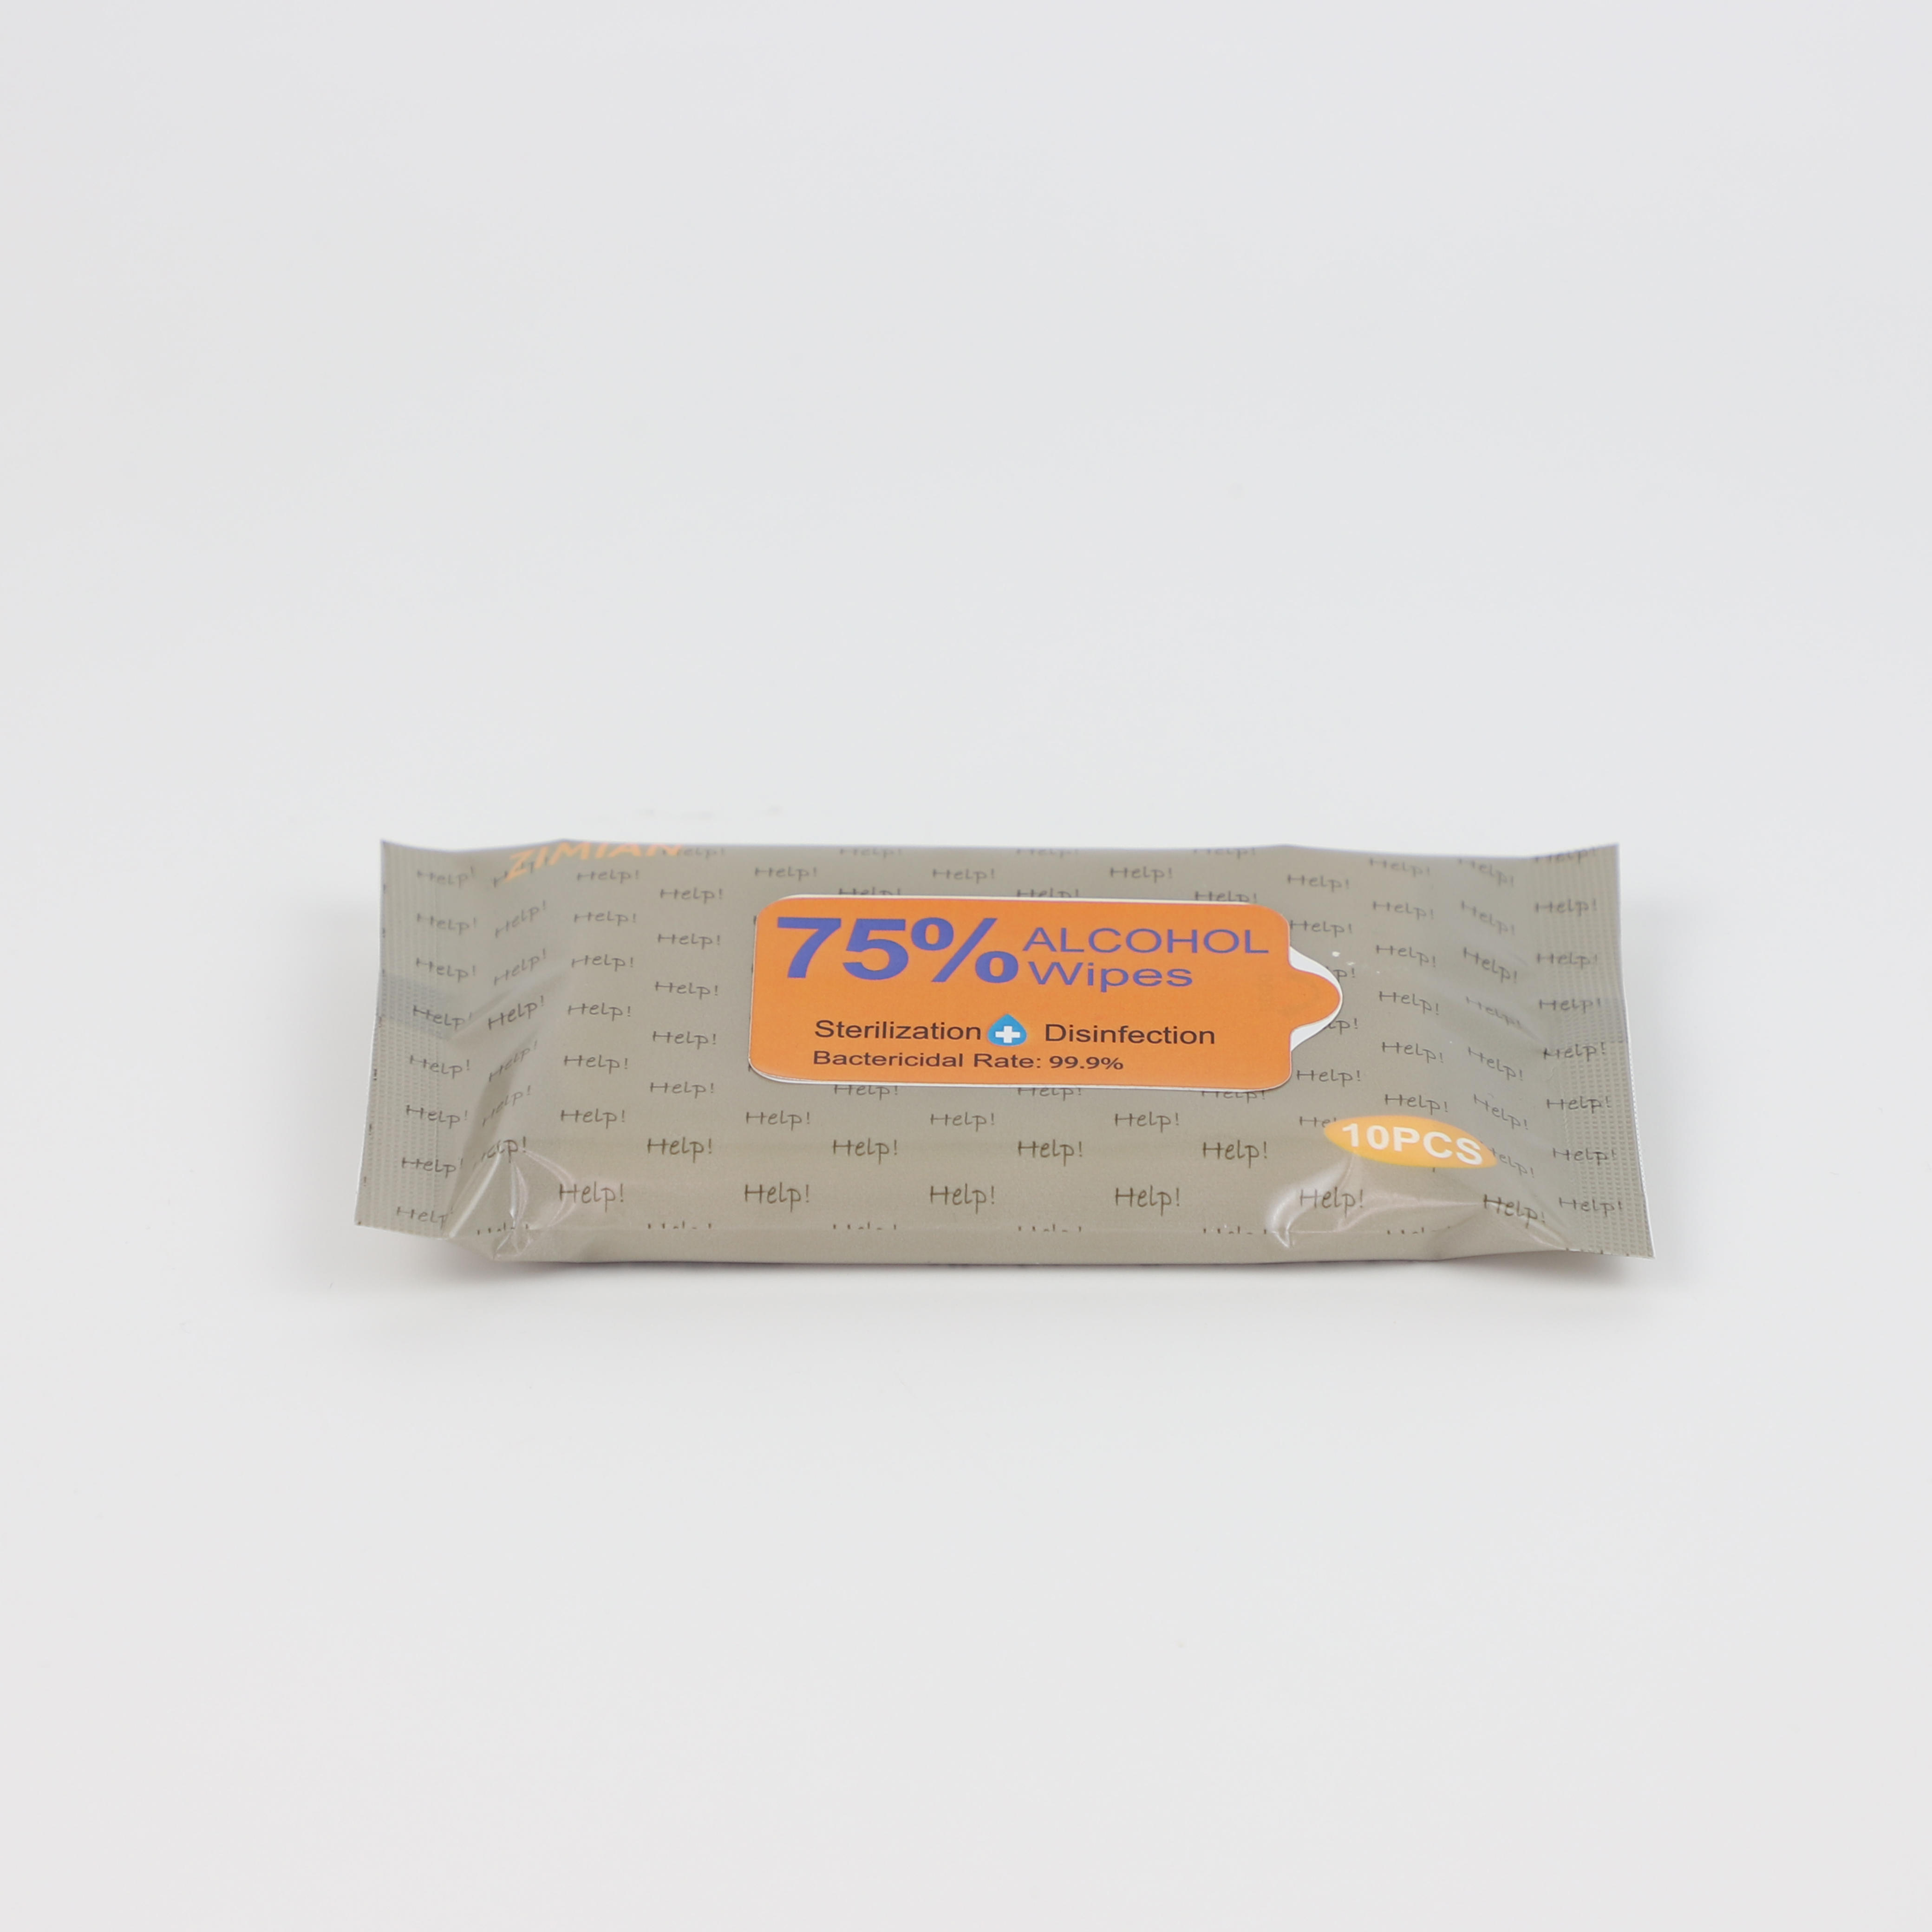 Alcohol Wet Wipes Manufacturer with 75% Content 10PCS 